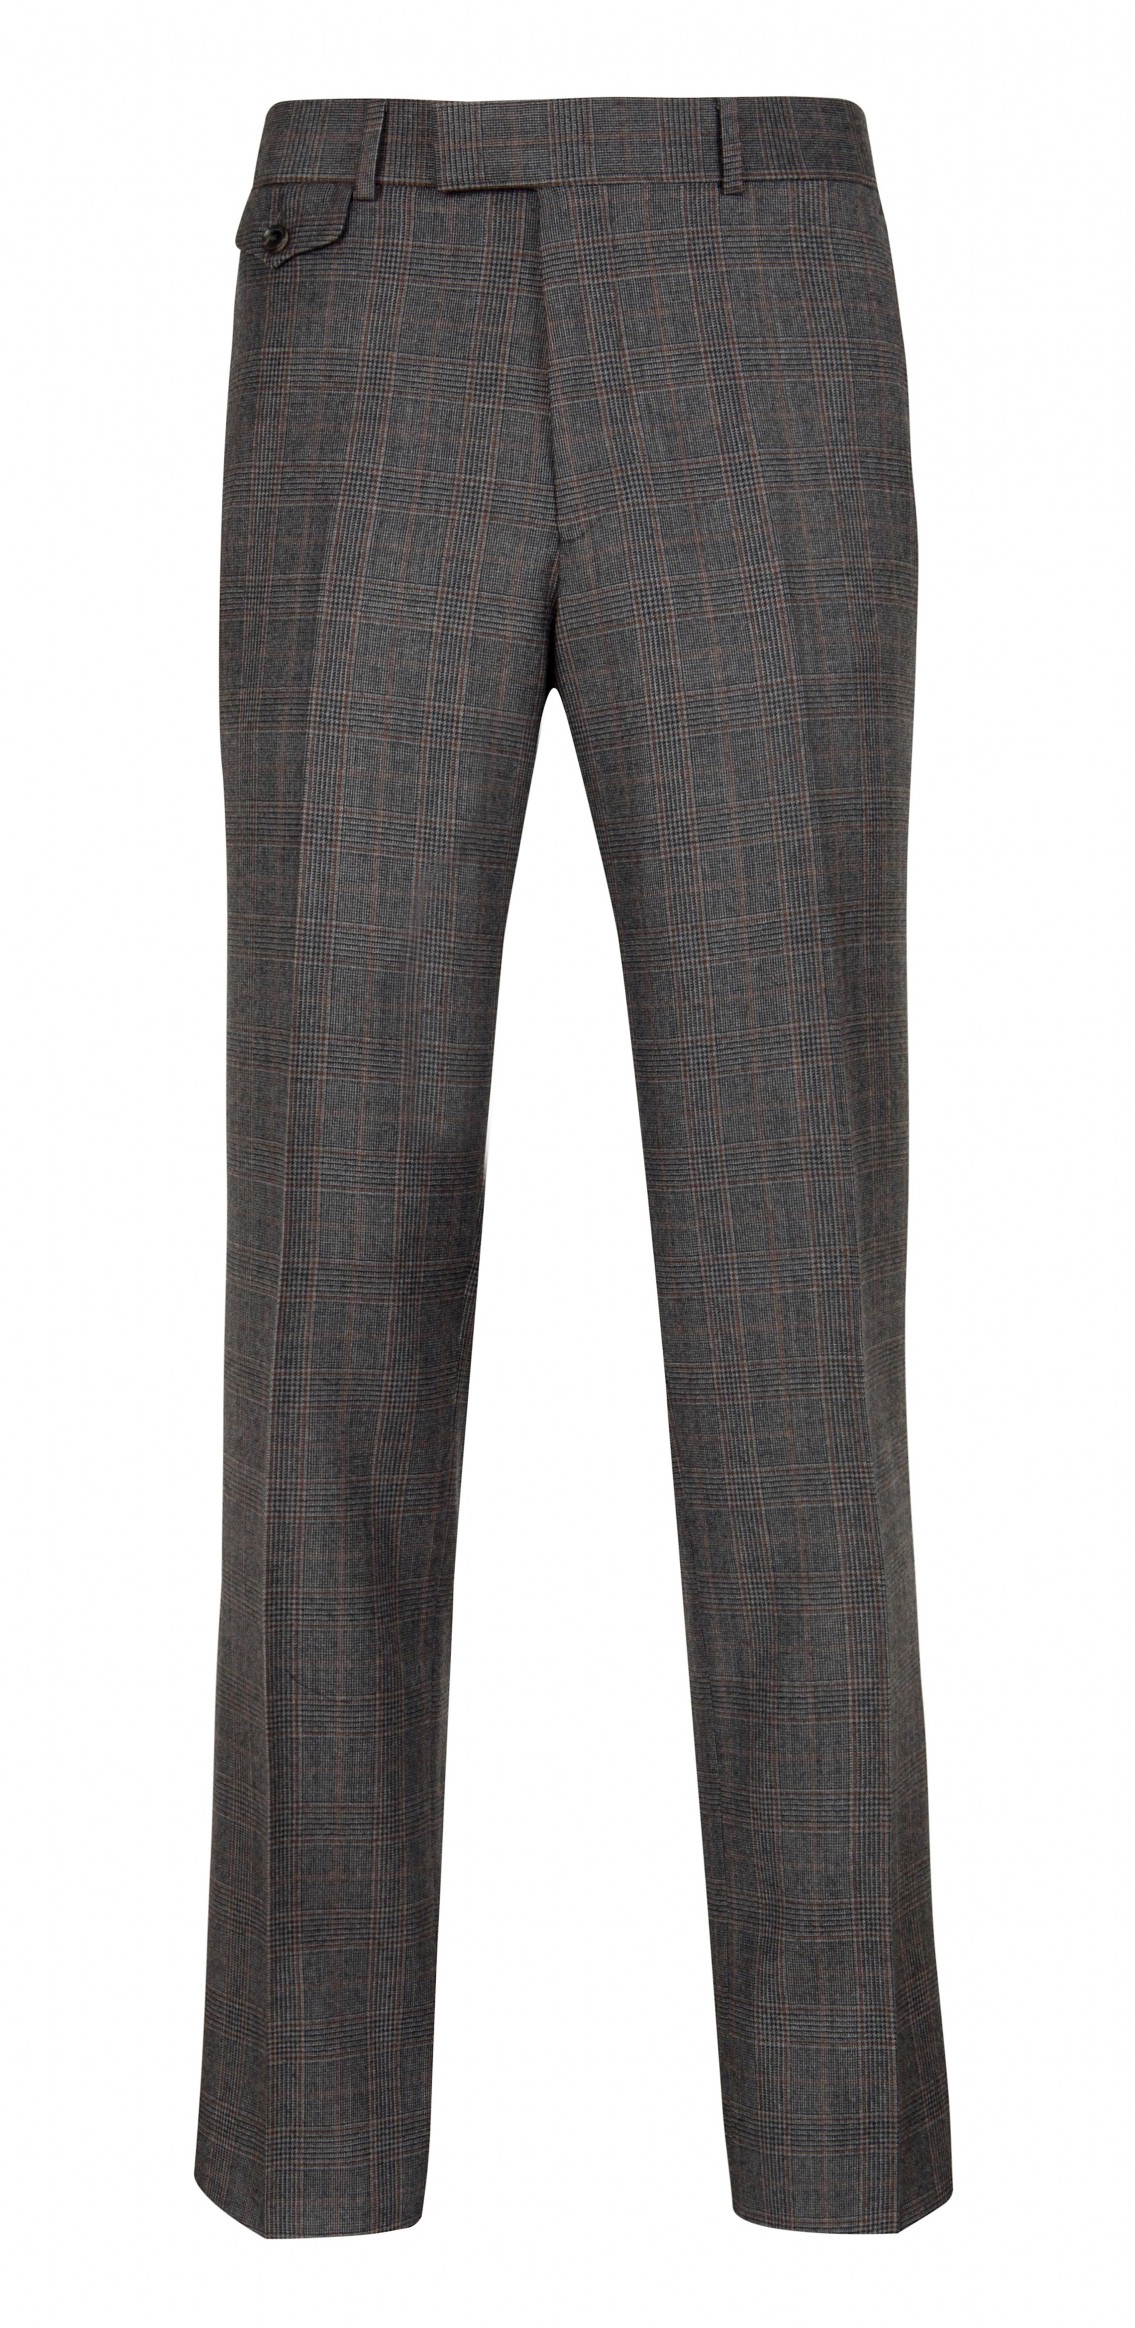 Checked wool trousers – what my boyfriend wore